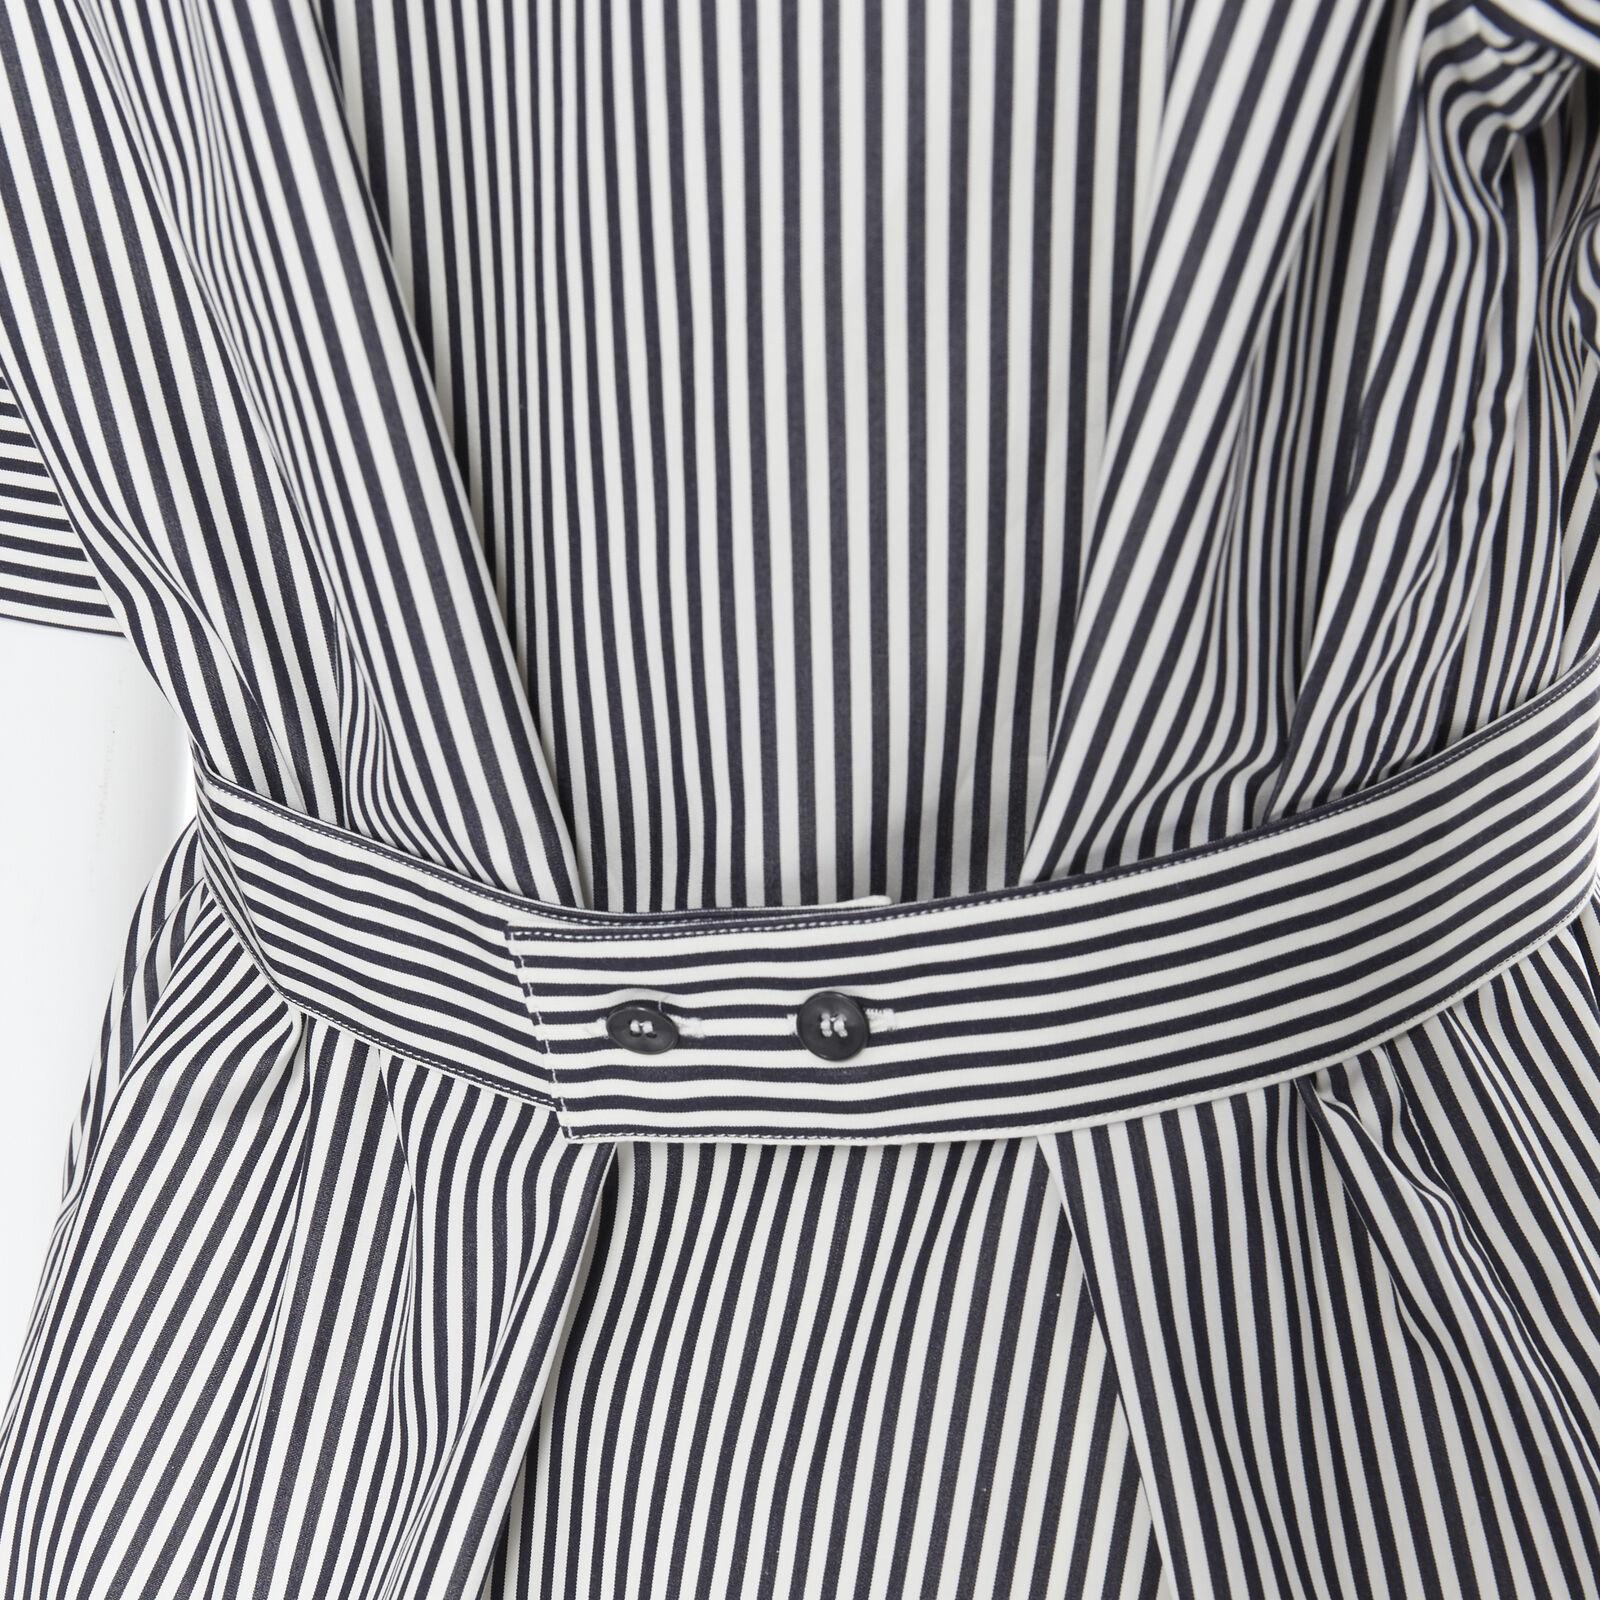 PALMER HARDING 100% cotton navy white contrast stripe cinched waist shirt UK6 XS For Sale 3